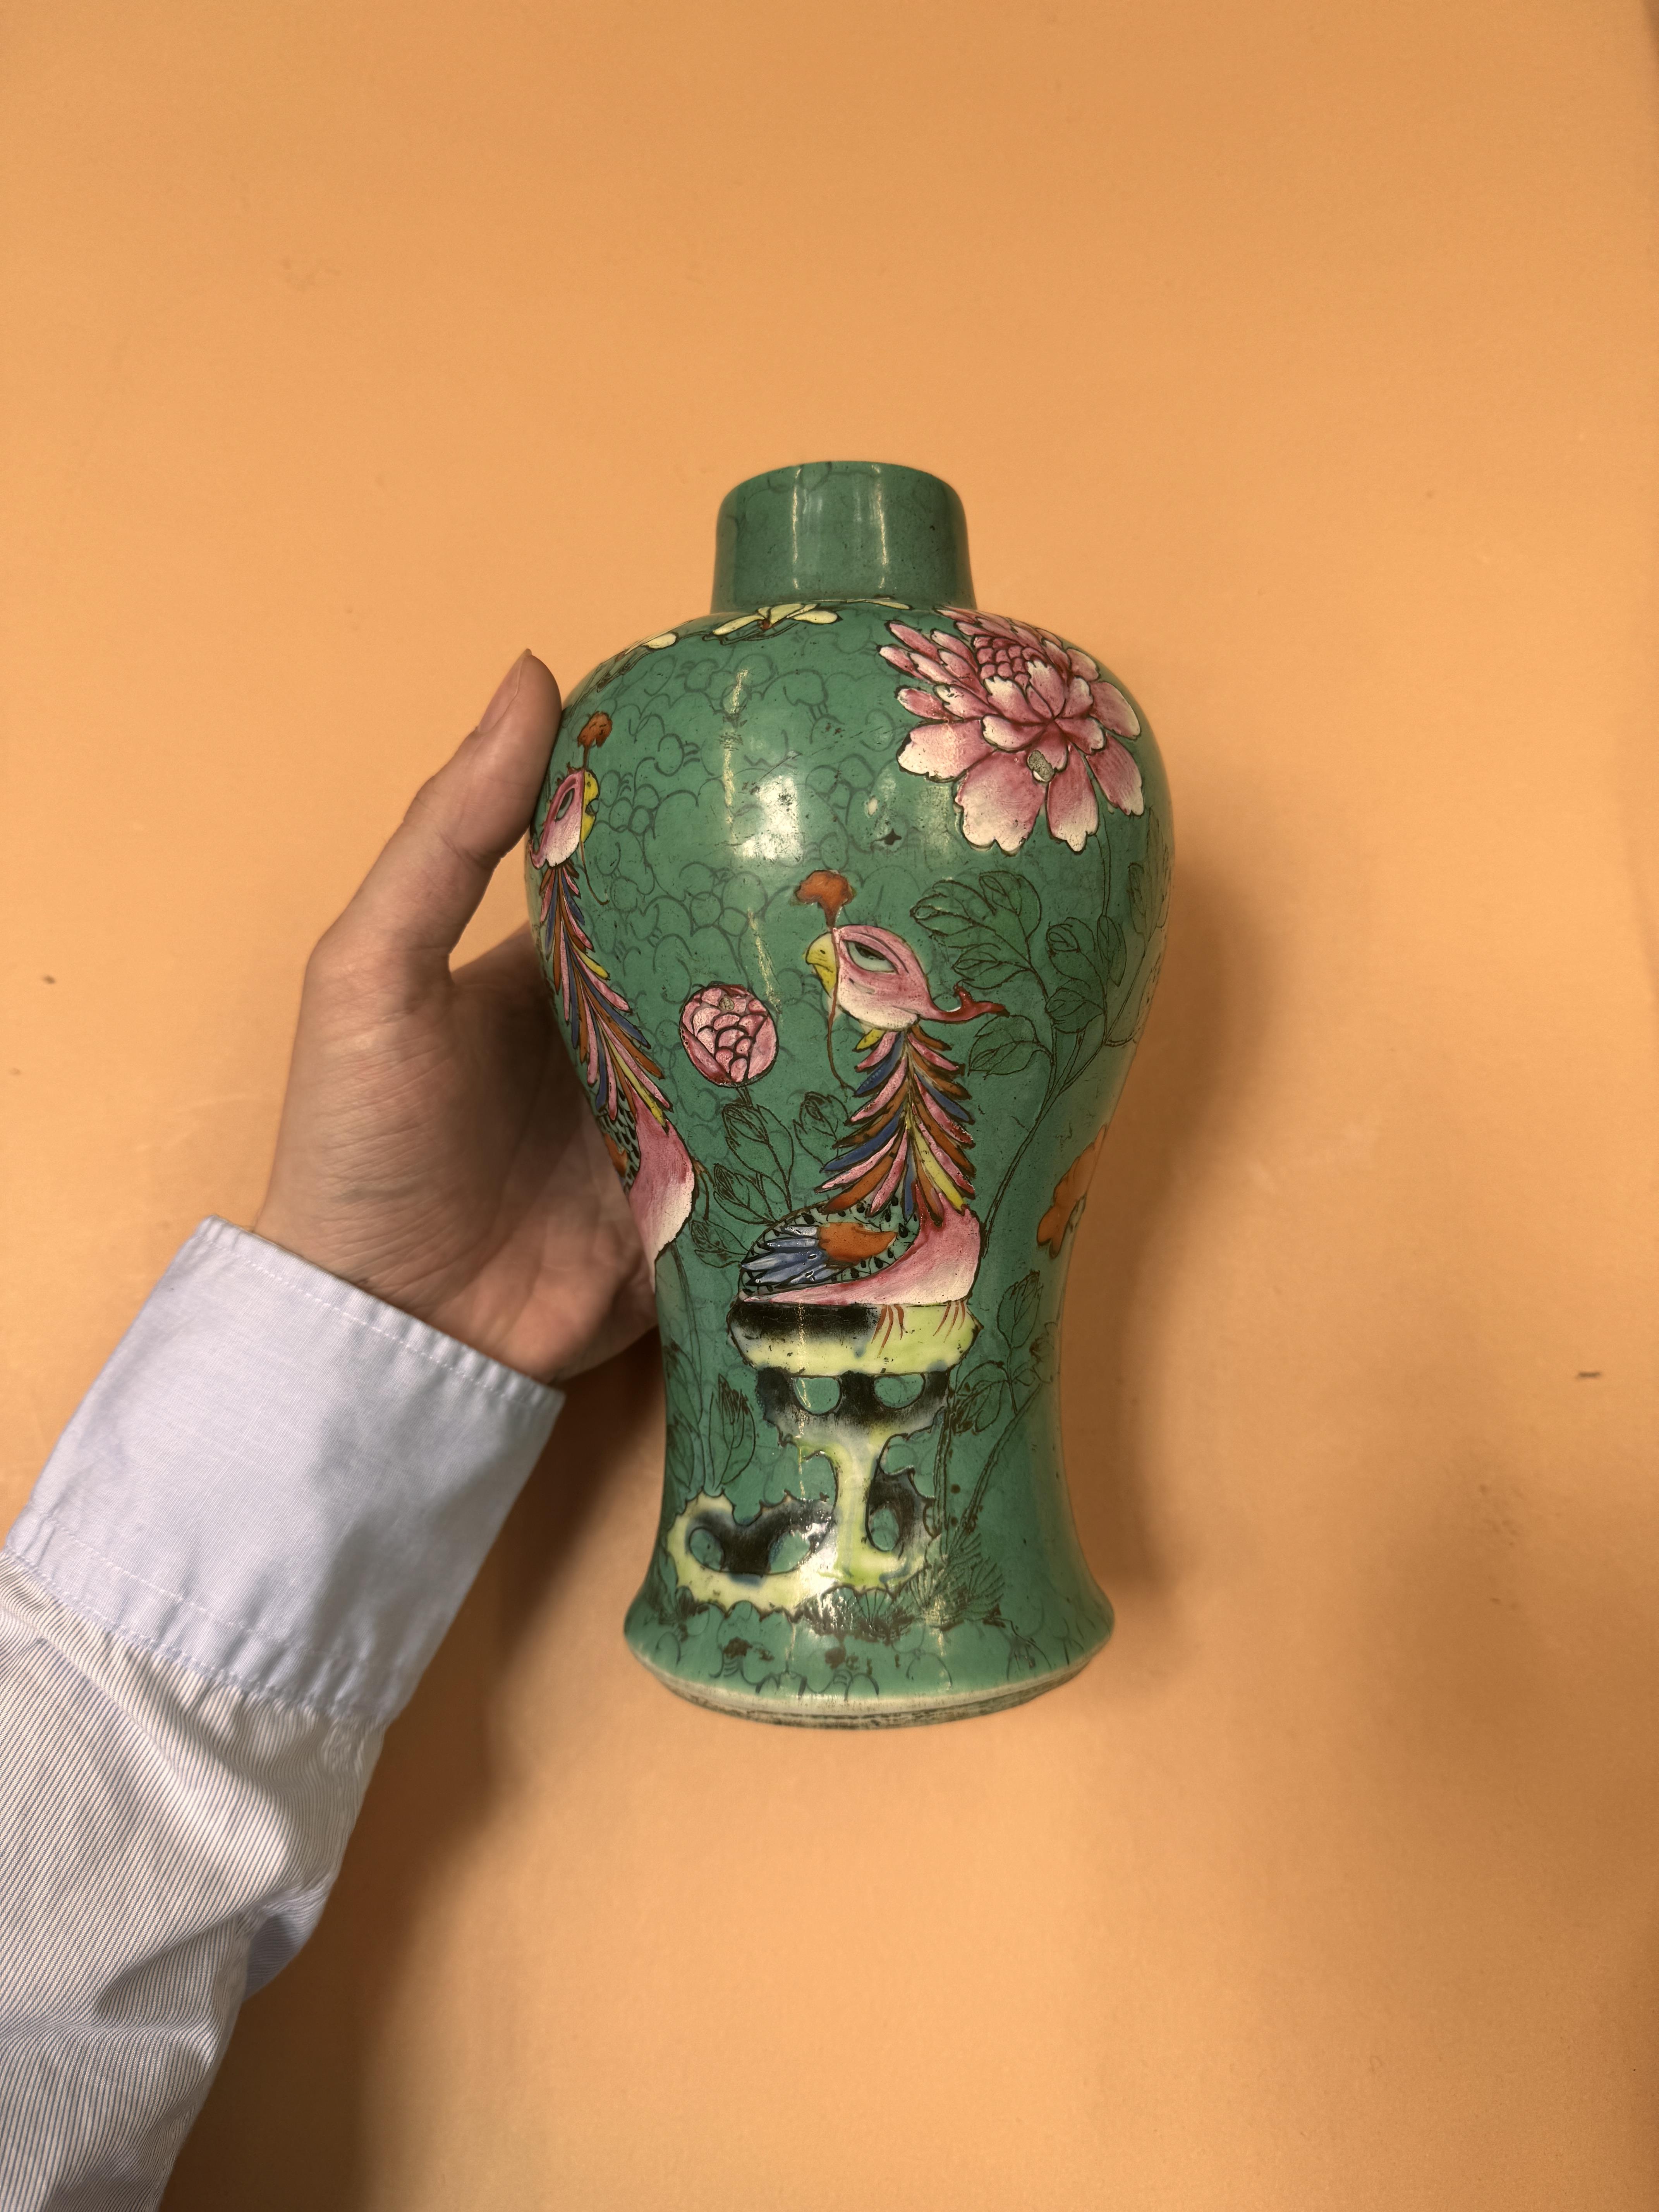 A CHINESE FAMILLE-ROSE 'PHOENIX' VASE FOR THE STRAITS OR PERANAKAN MARKET 清十八世紀 粉彩松石綠地穿花鳳紋瓶 - Image 8 of 11